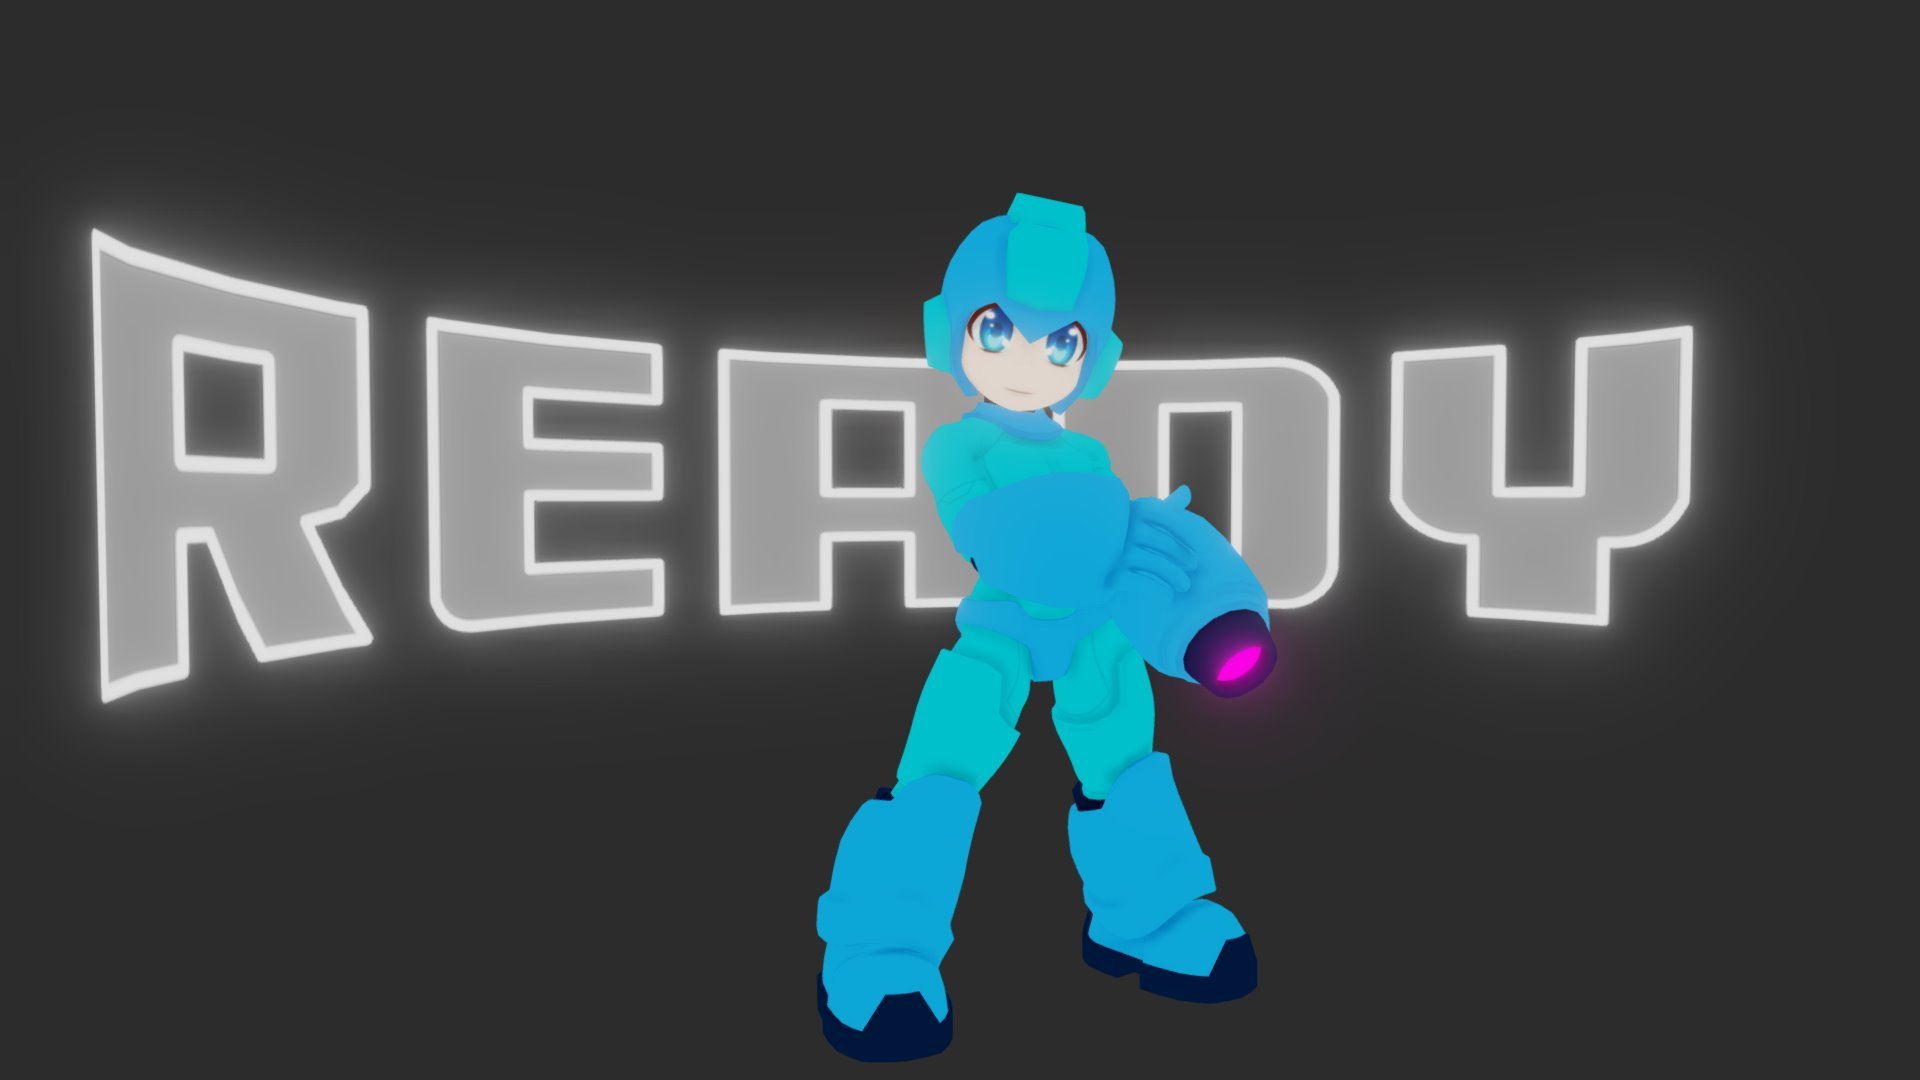 Modeling in Blender, designed for use in Unity3d.

Megaman is a character property by Capcom. Copyright © 2017 Capcom. All rights reserved 3d model